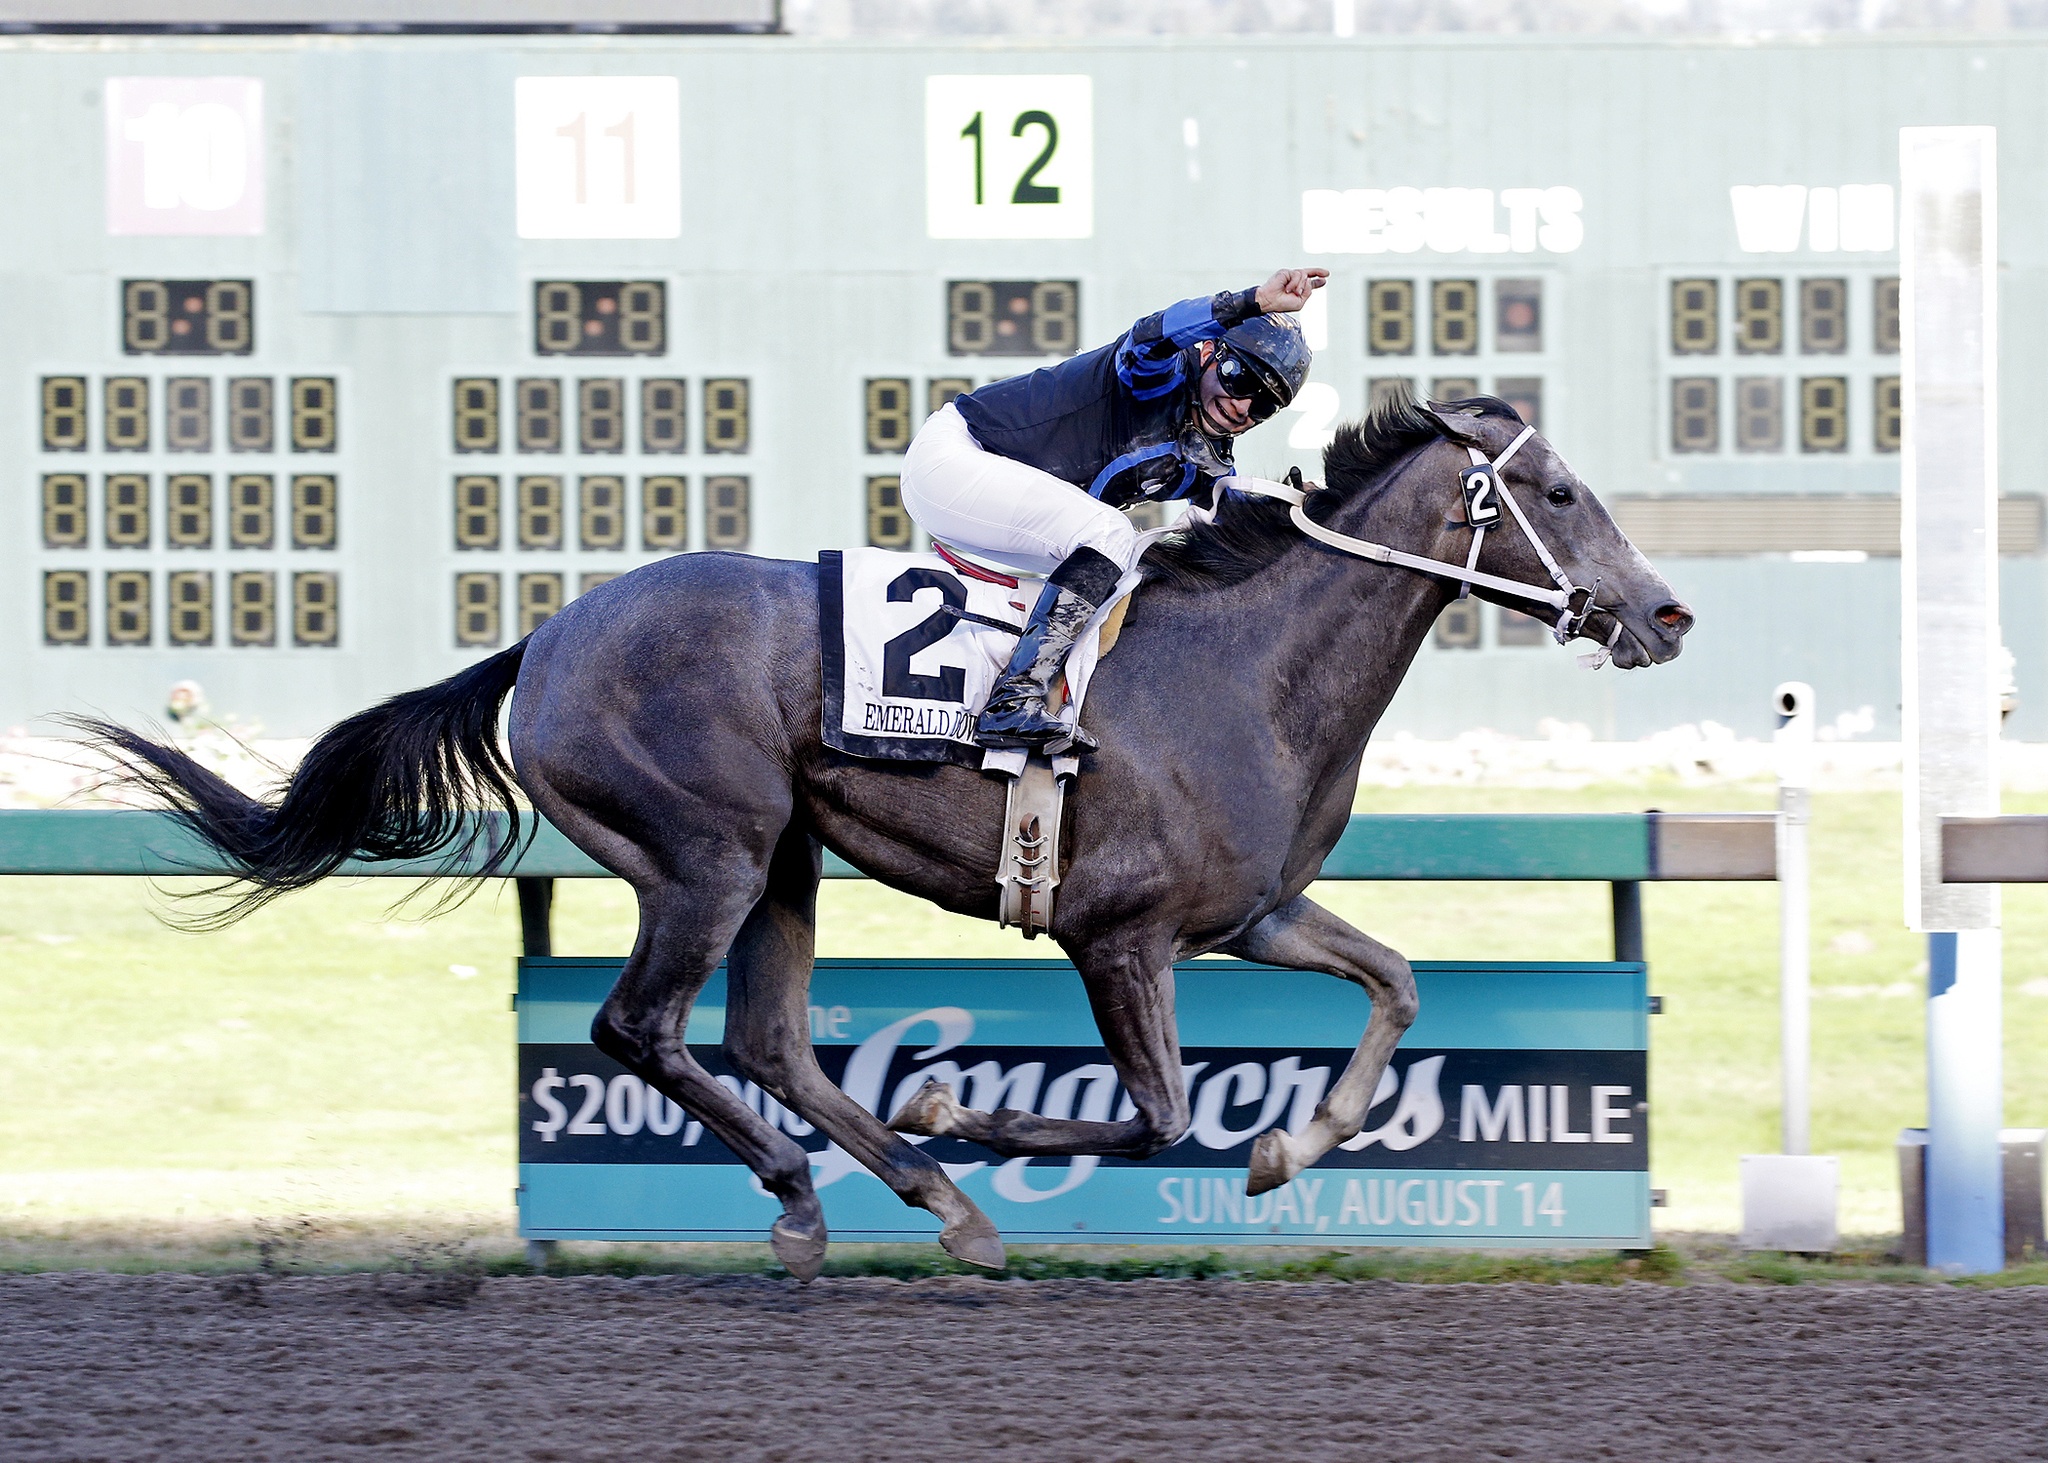 Blazinbeauty and jockey Isaias Enriquez score the victory by six lengths in the 76th running of the Joe Gottstein Futurity for 2-year-olds on Sunday’s closing day card at Emerald Downs. Courtesy Emerald Downs photo